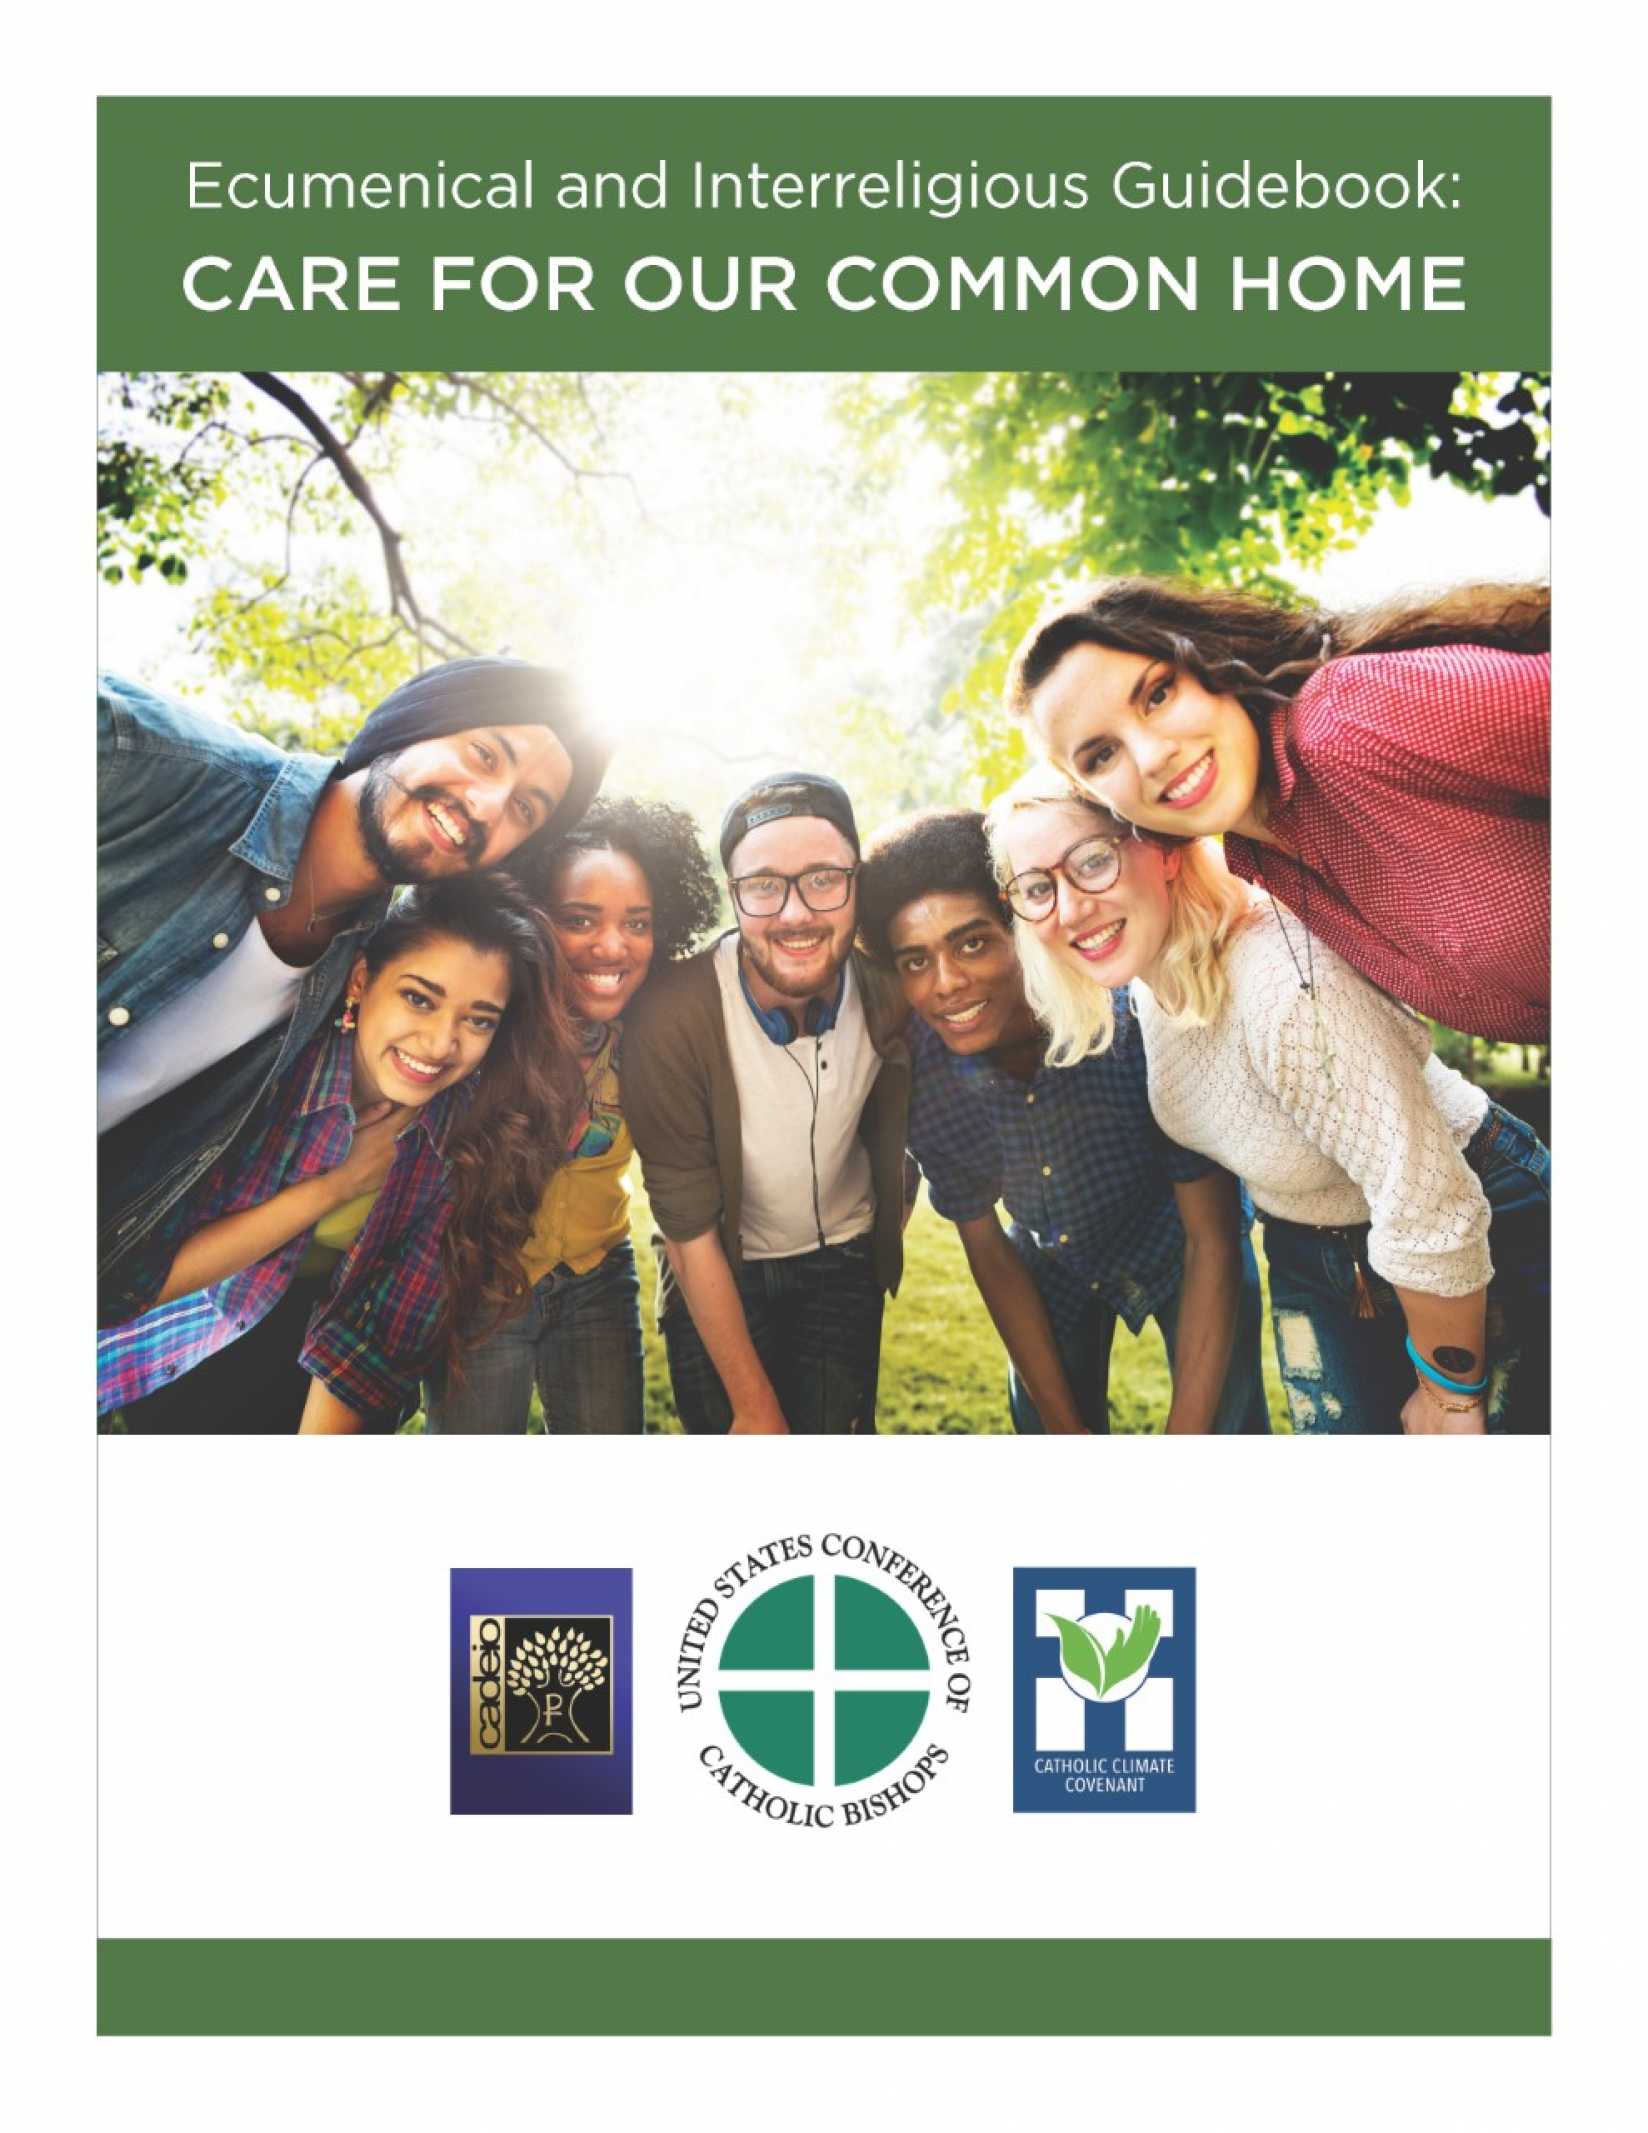 SEIA Jointly Launches Guidebook for Care for Our Common Home